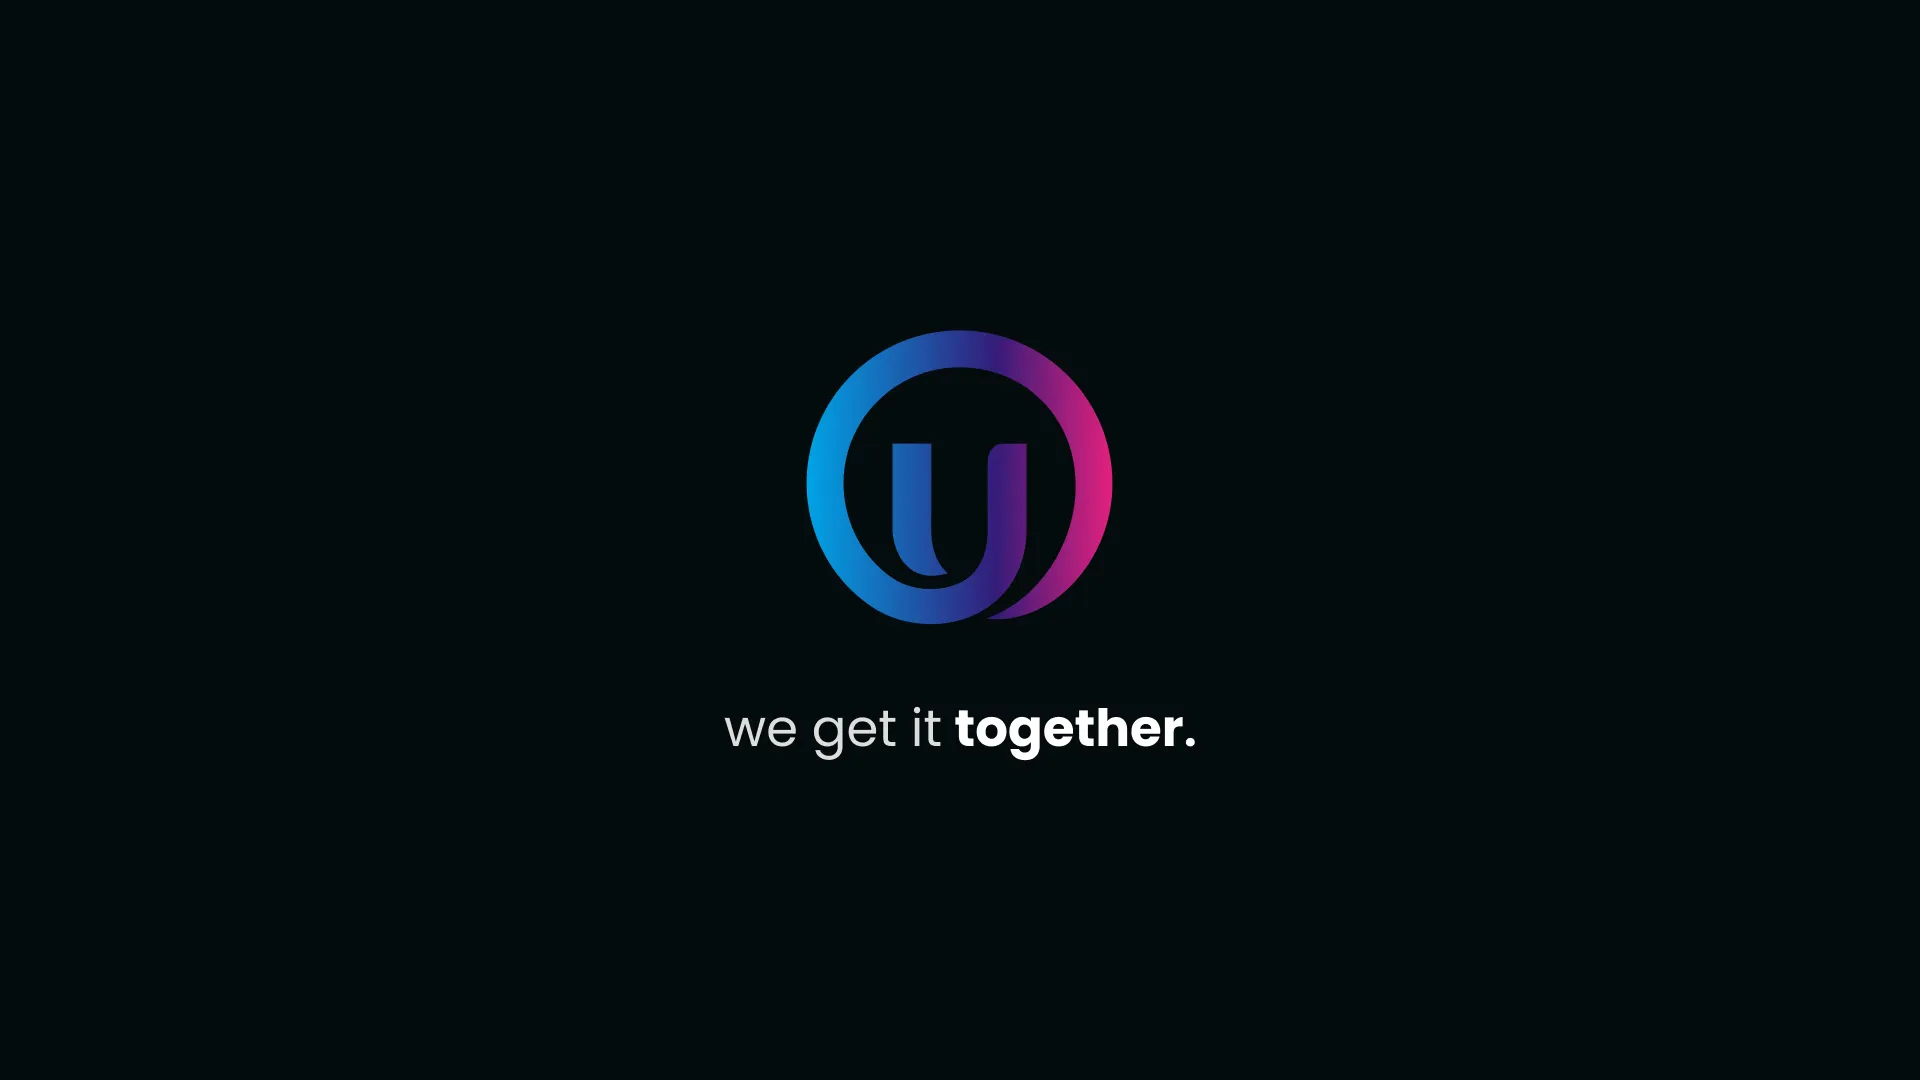 The Unify logo on a gradient background with the text 'we get it together' below the logo.